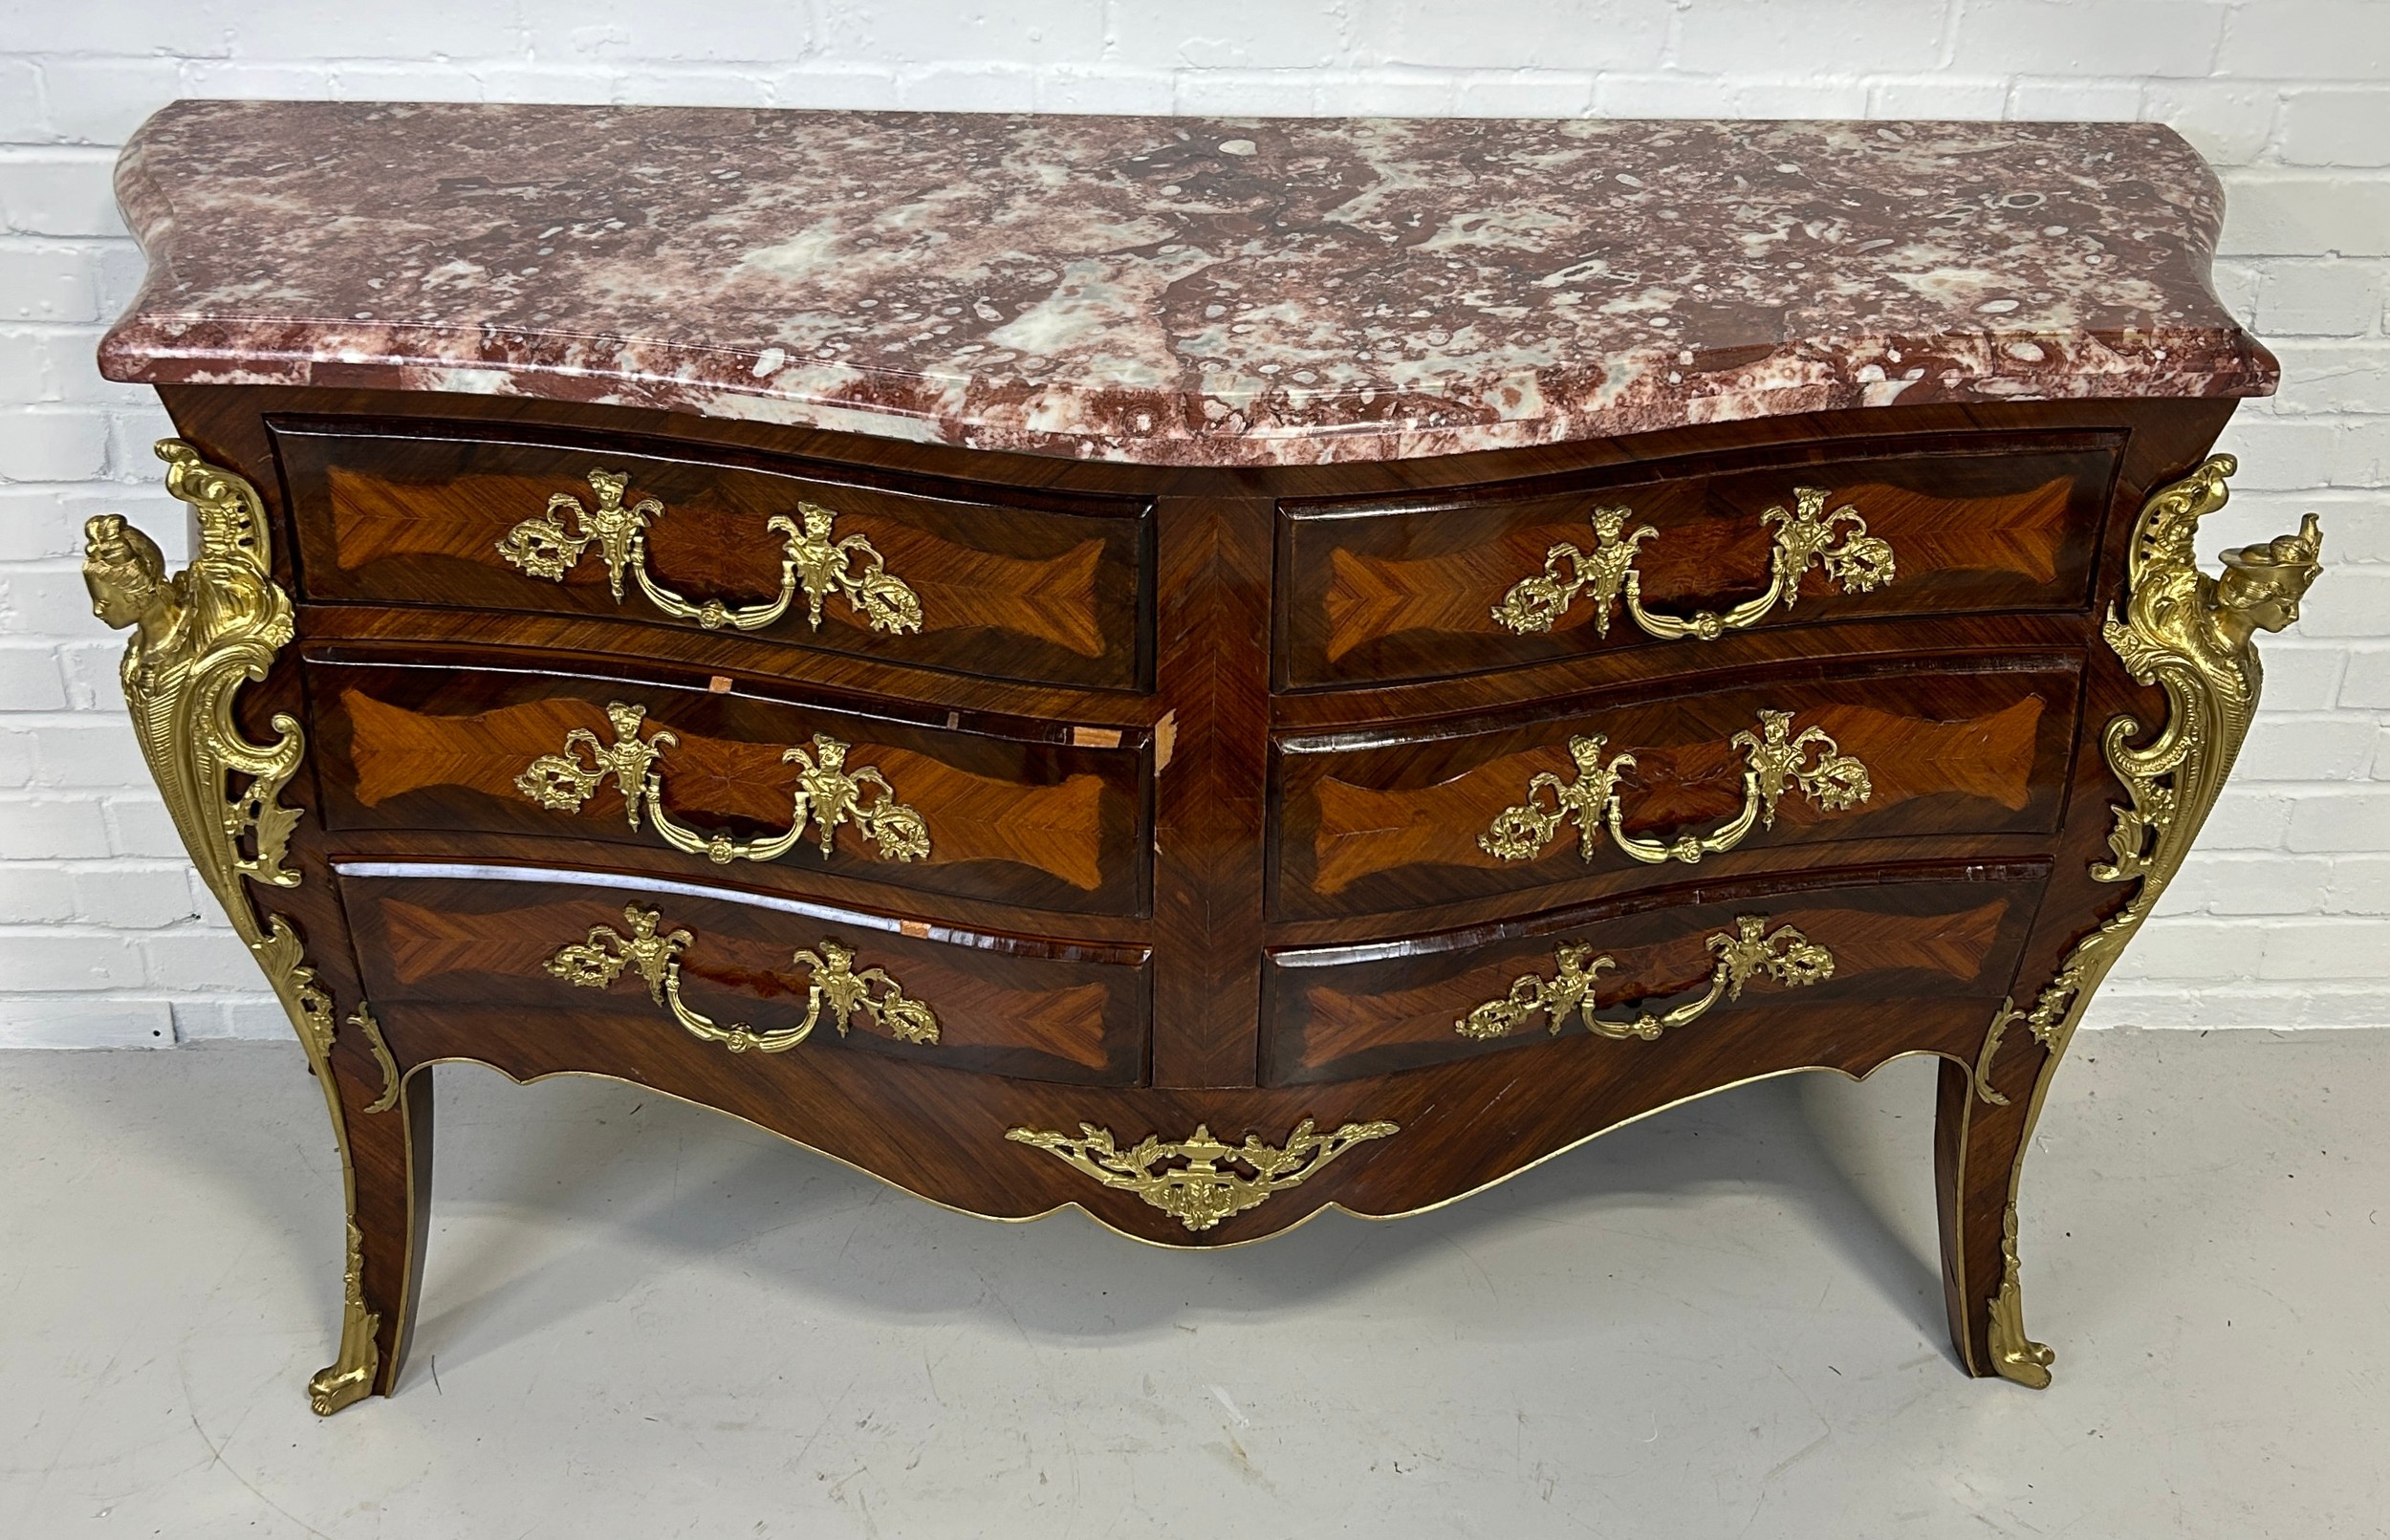 A LARGE LOUIS XVI STYLE BOMBE COMMODE WITH GILT BRONZE MOUNTS, 167cm x 95cm x 58cm - Image 2 of 9